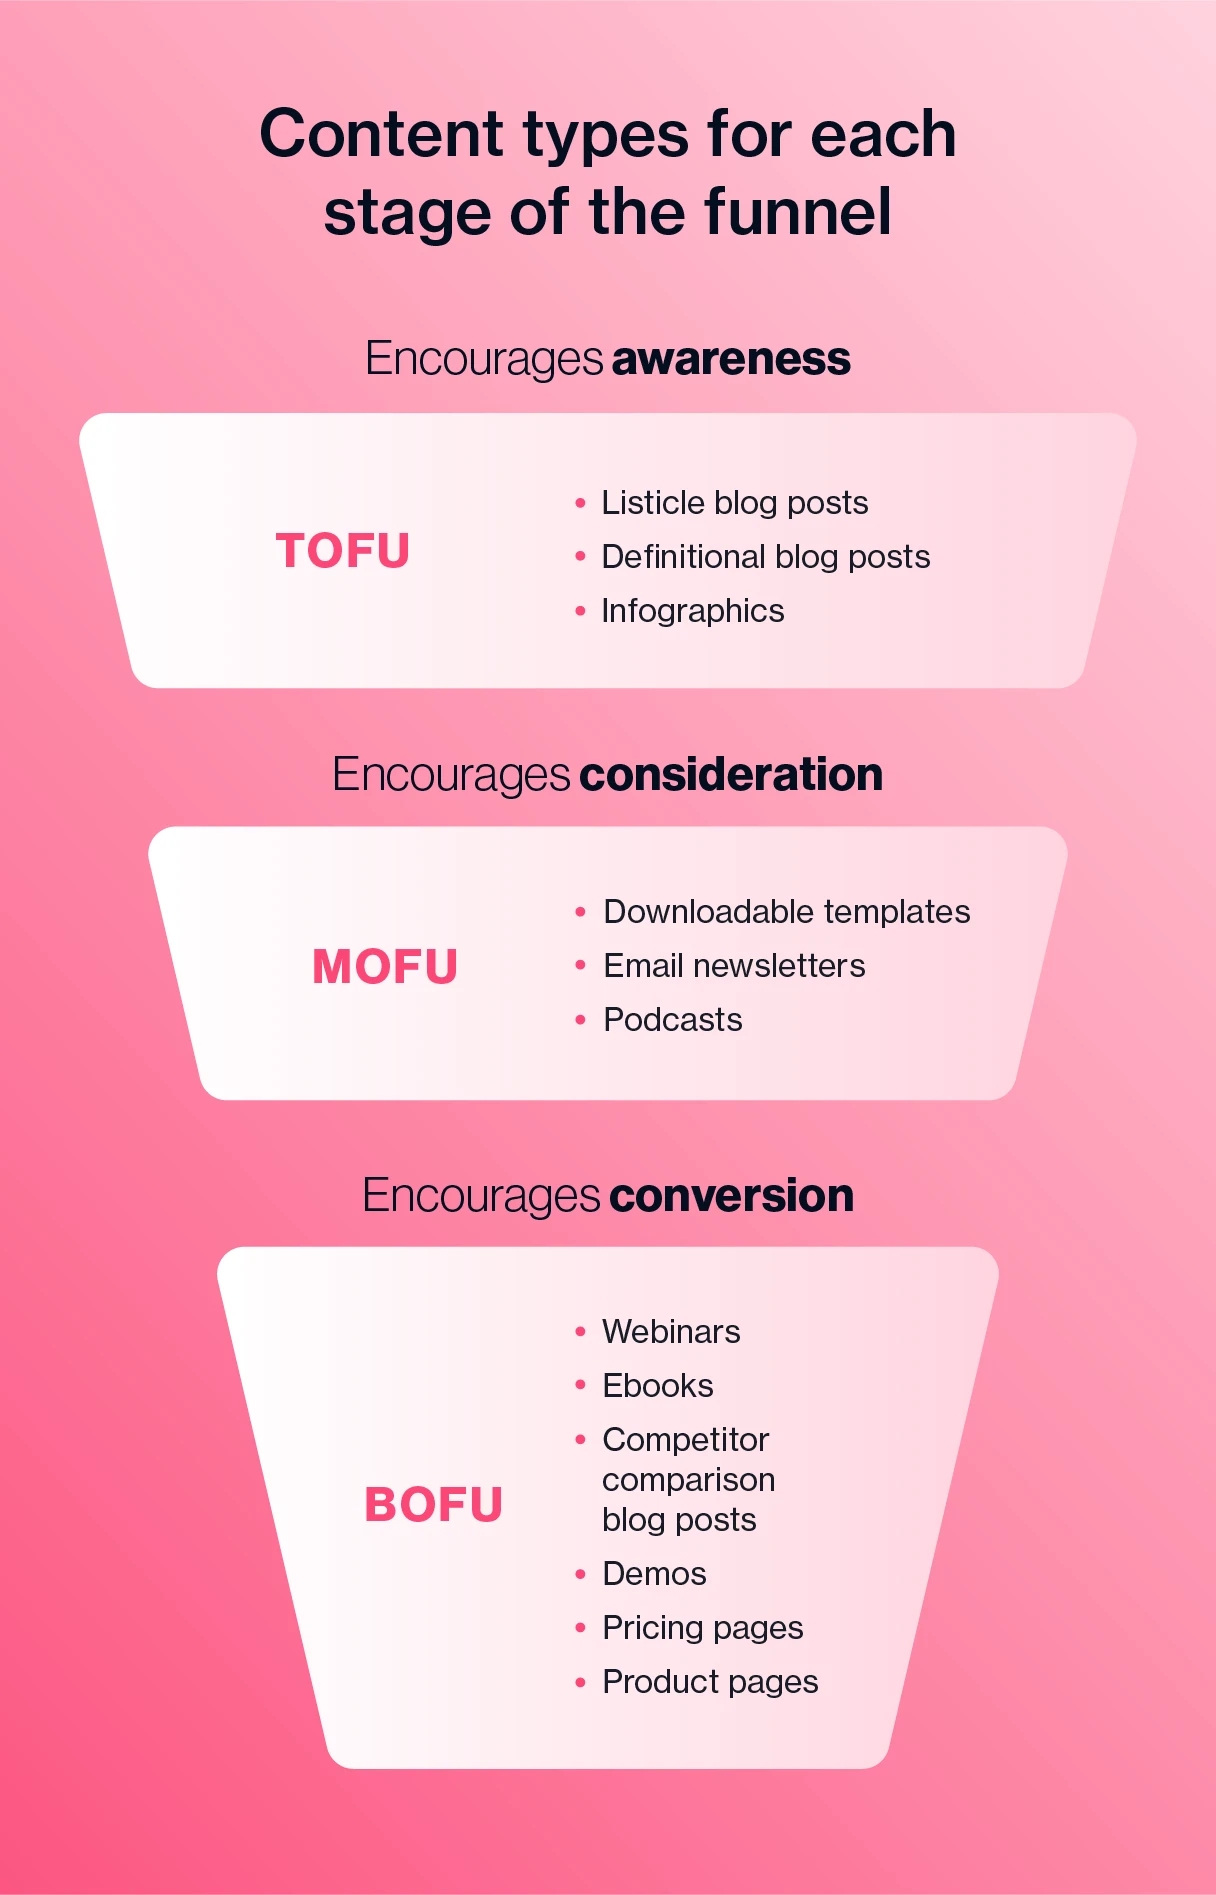 content-types-for-each-stage-of-the-funnel.webp